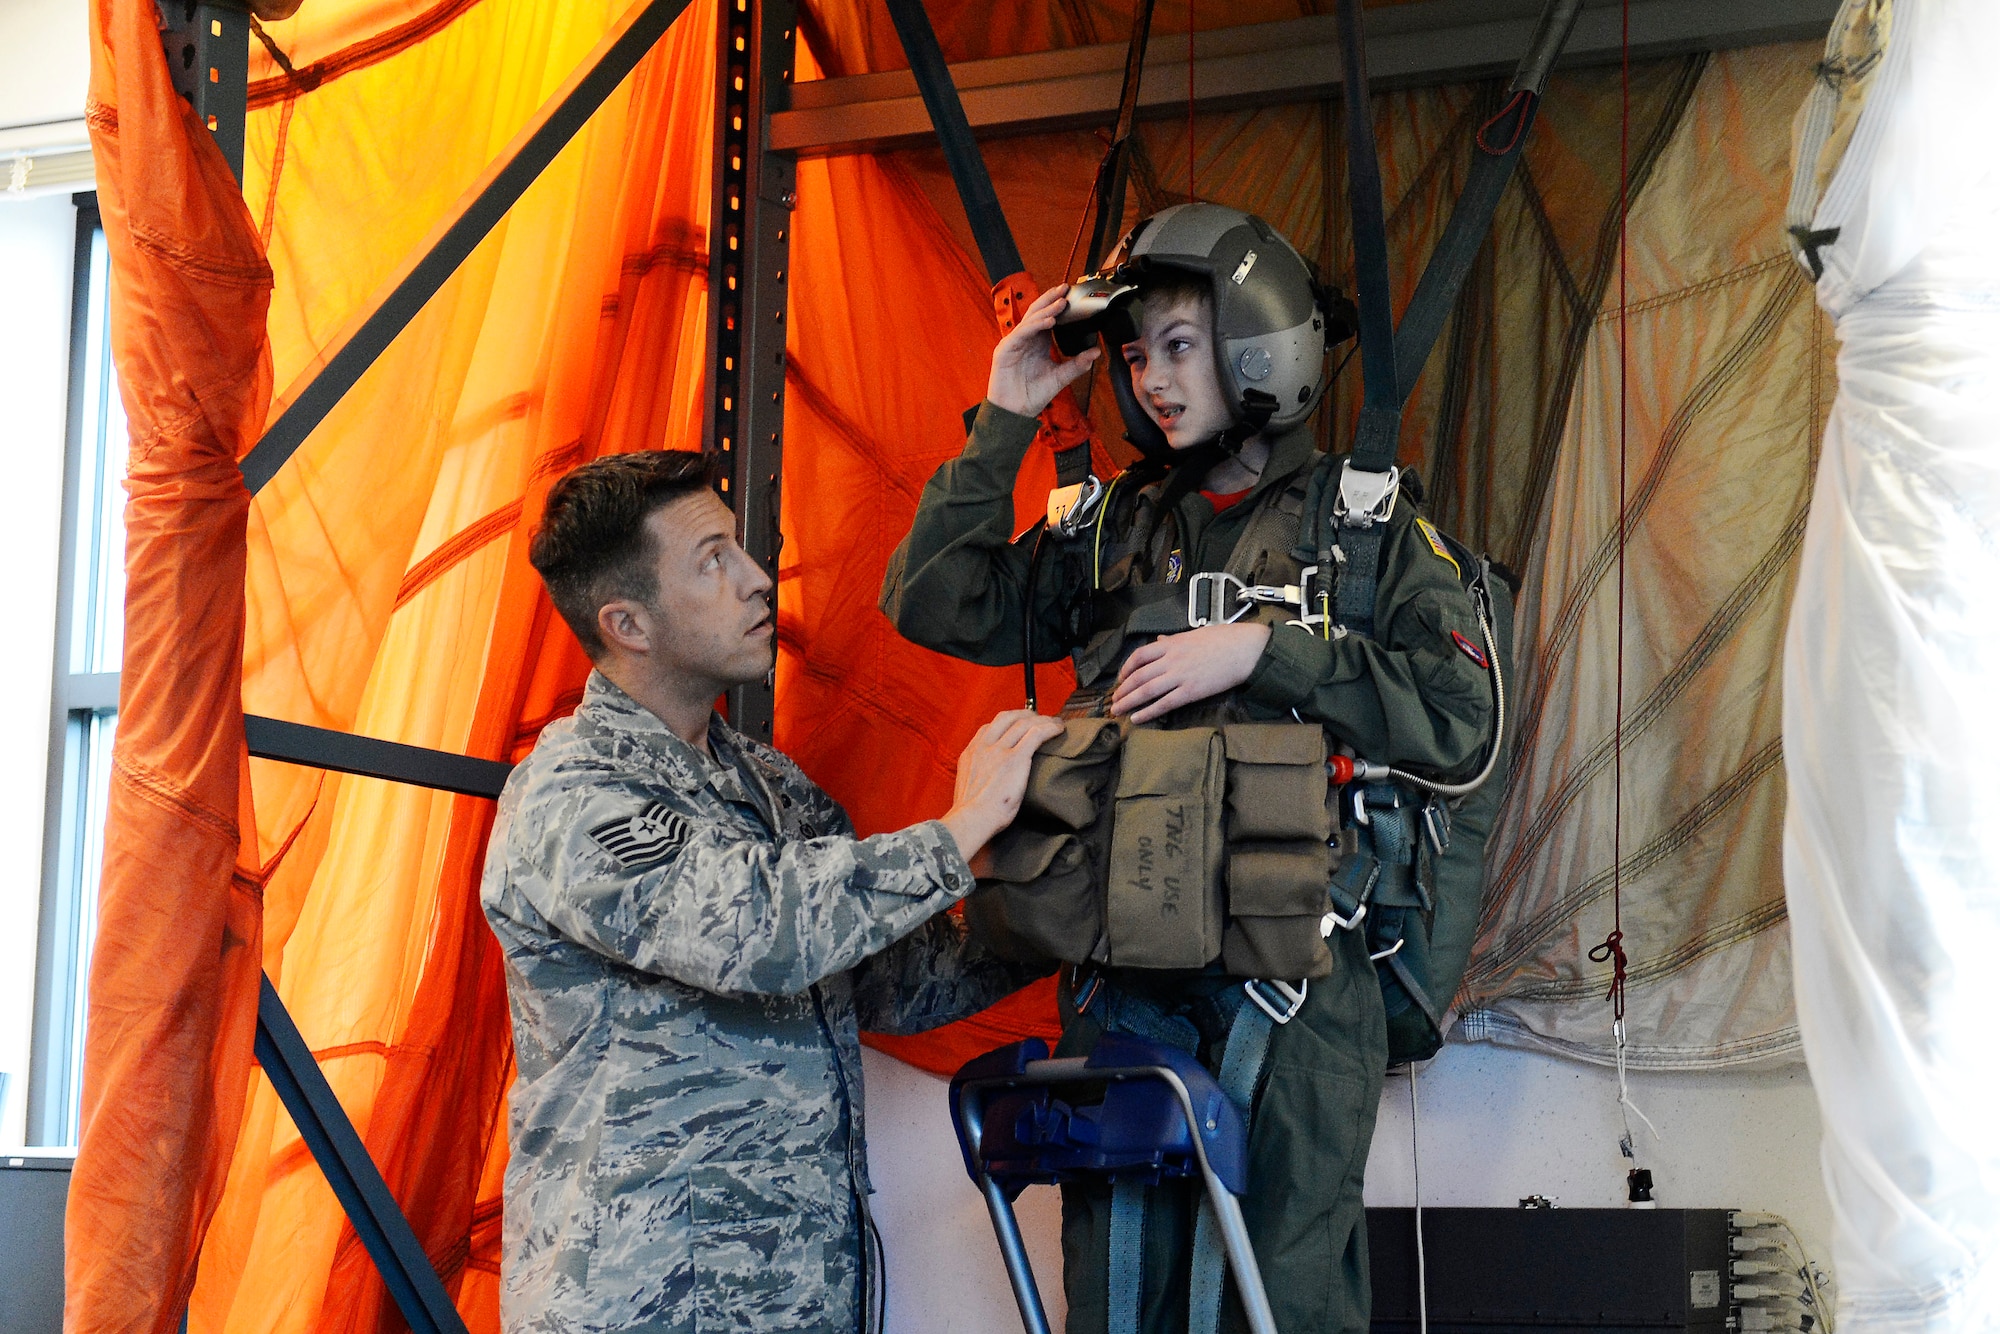 Carver Faull, participant in the Pilot for a Day program, looks into the virtual reality goggles he’ll use to complete his simulated Survival, Evasion, Resistance and Escape parachute training, Feb. 20, 2015, at Joint Base Lewis-McChord, Wash. The goggles simulated falling from 4,000 feet, and Carver’s goal was to navigate the parachute to the sand for a soft landing. (U.S. Air Force photo/Senior Airman Rebecca Blossom)